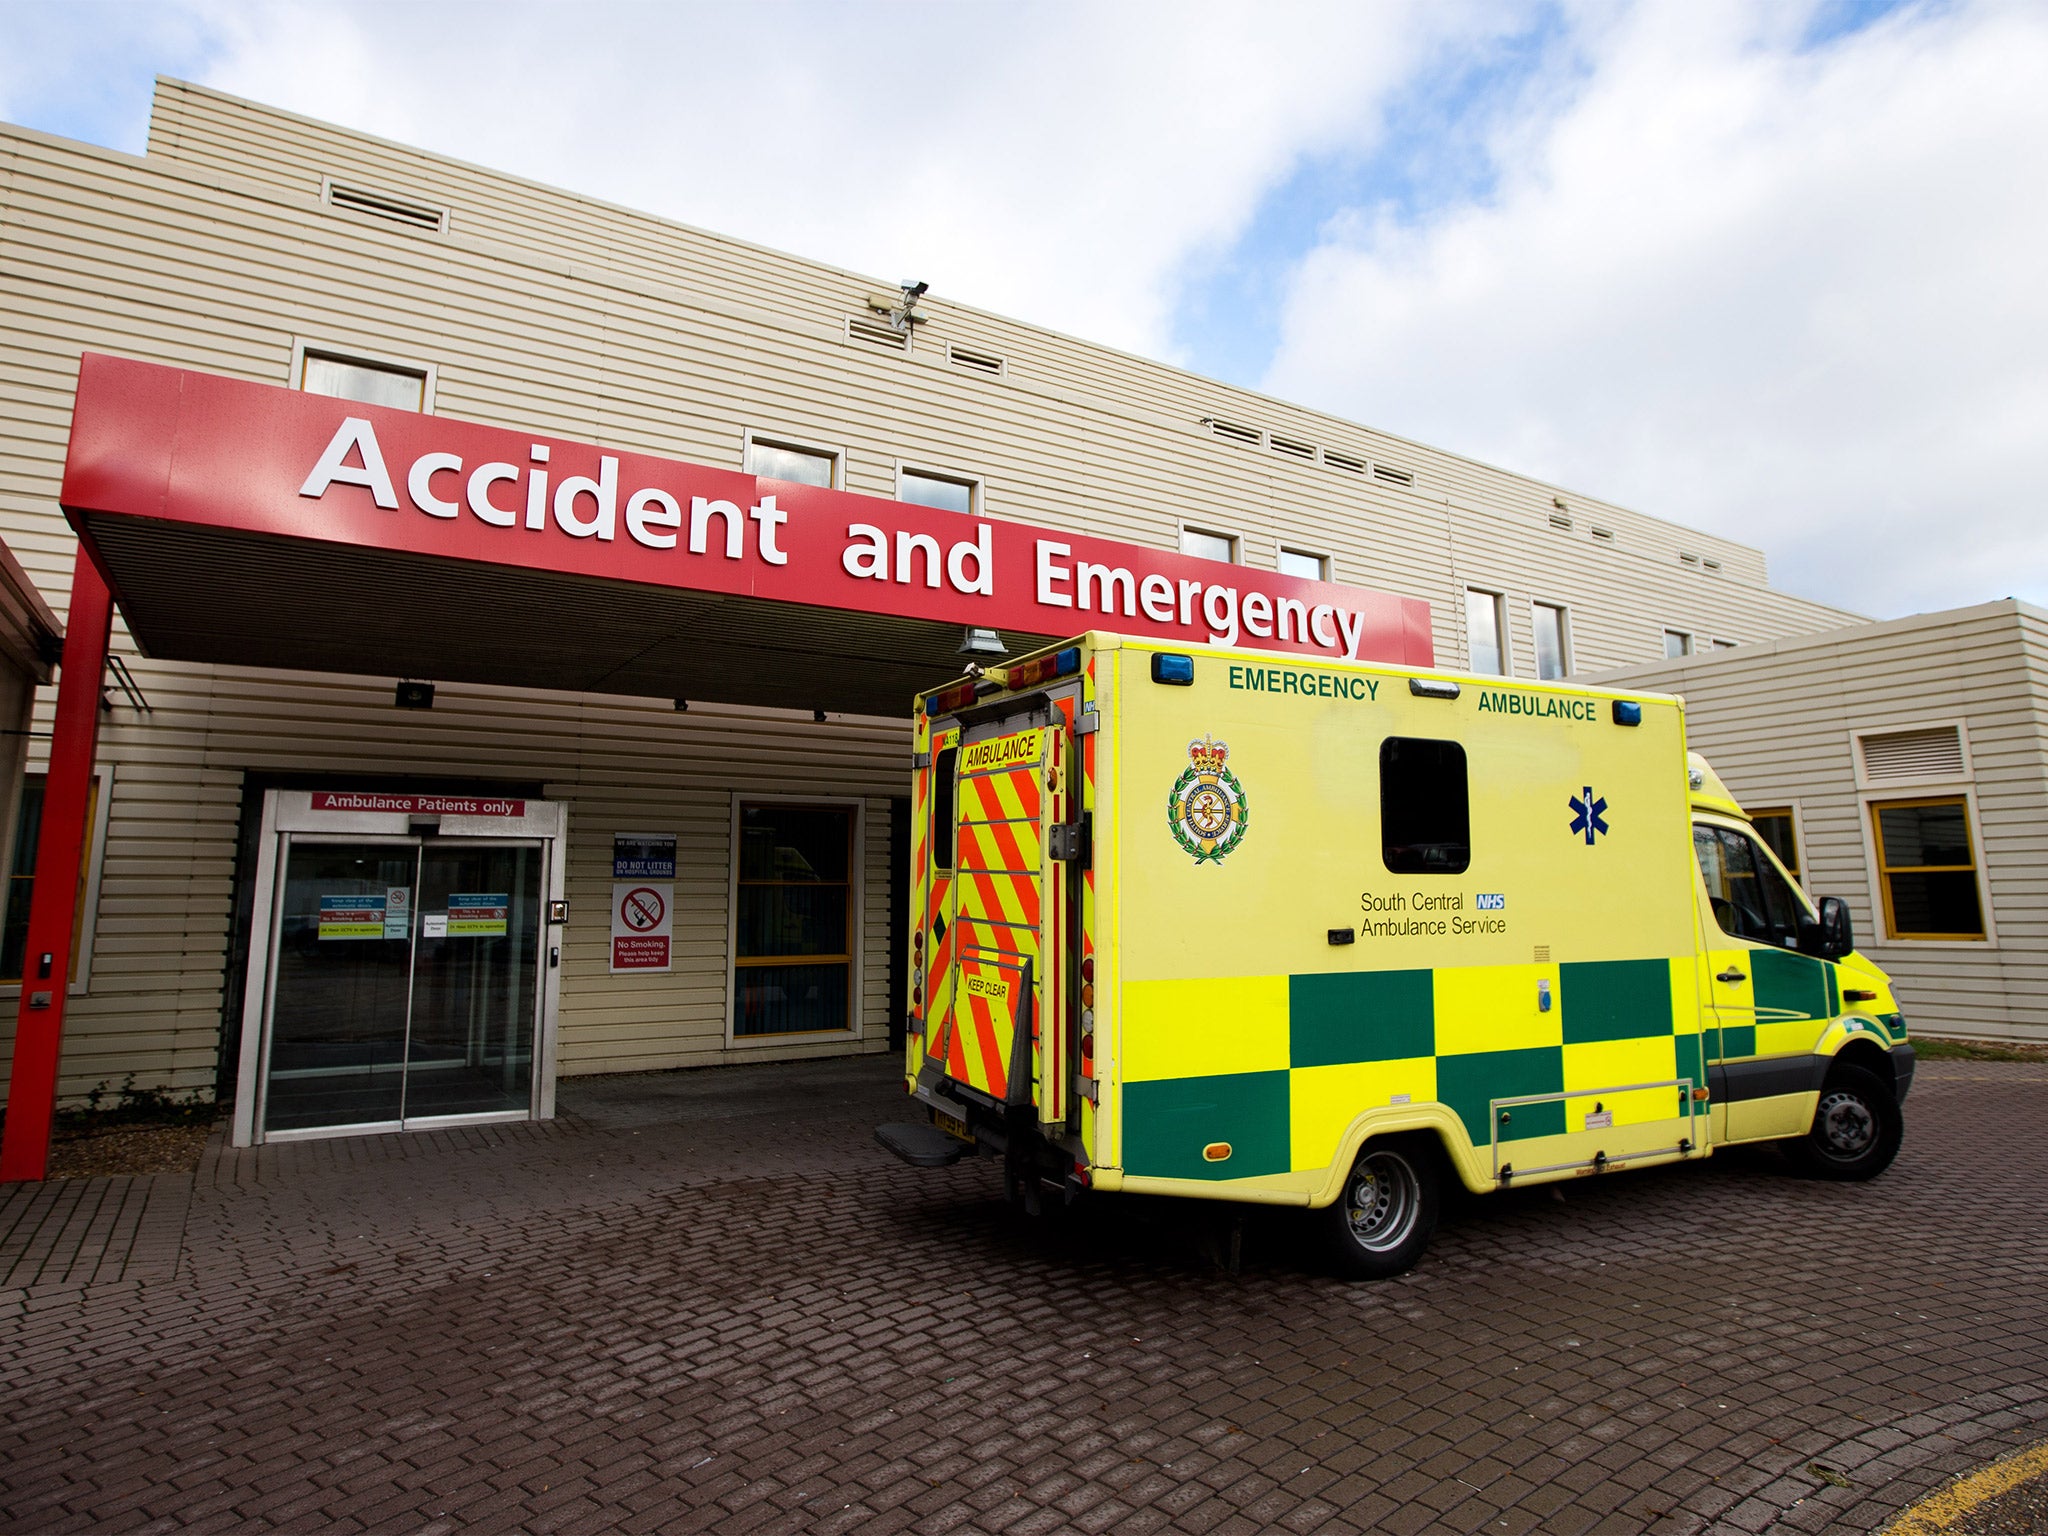 Local A&E departments could be at risk